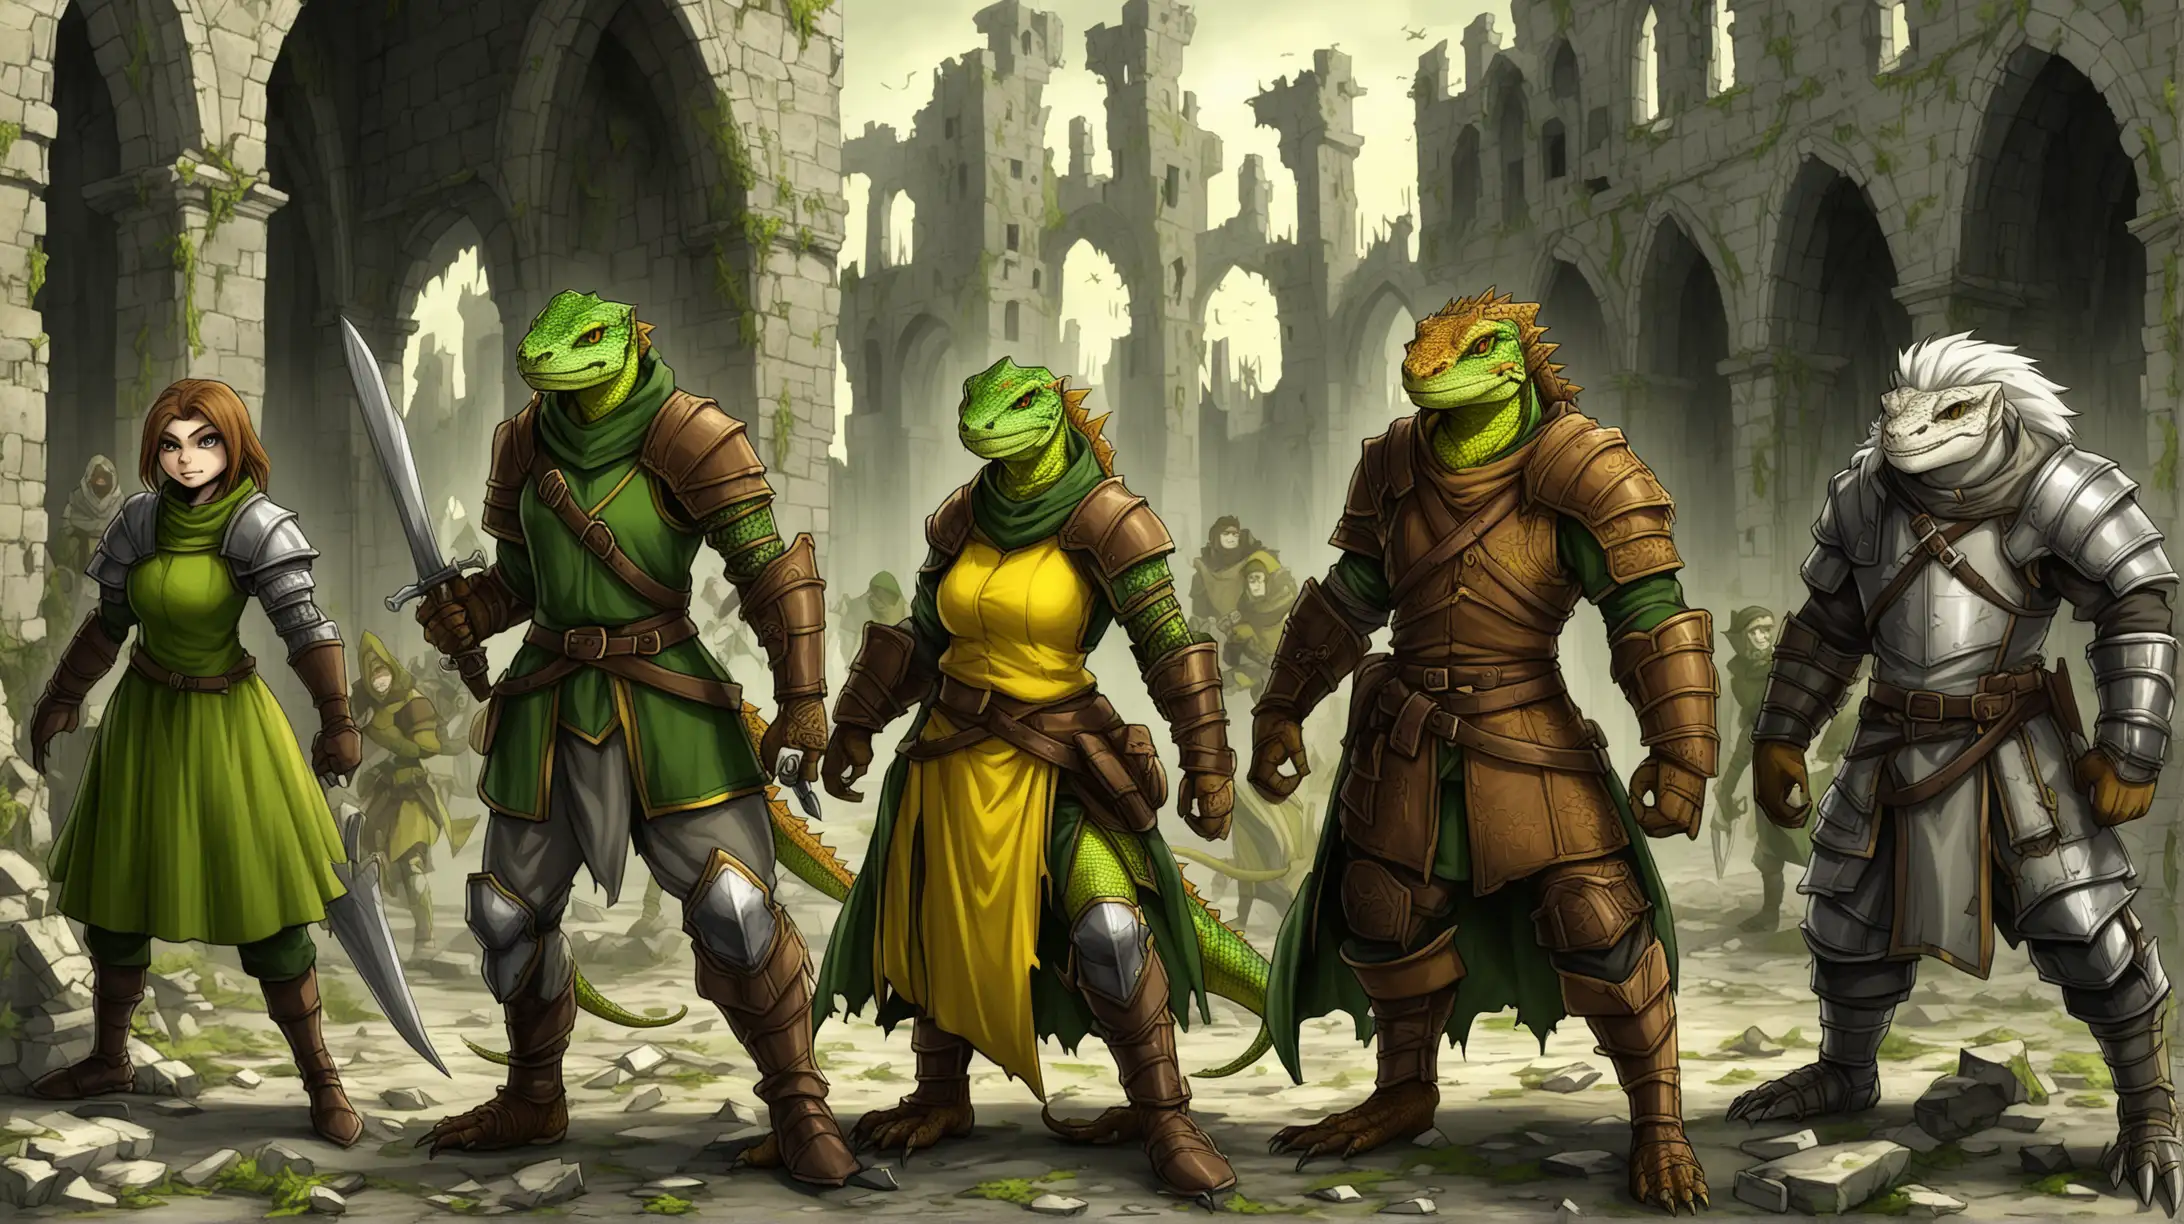 Medieval Fantasy Warriors Rogues in Ruins with Hybrid Lizard Men and Women